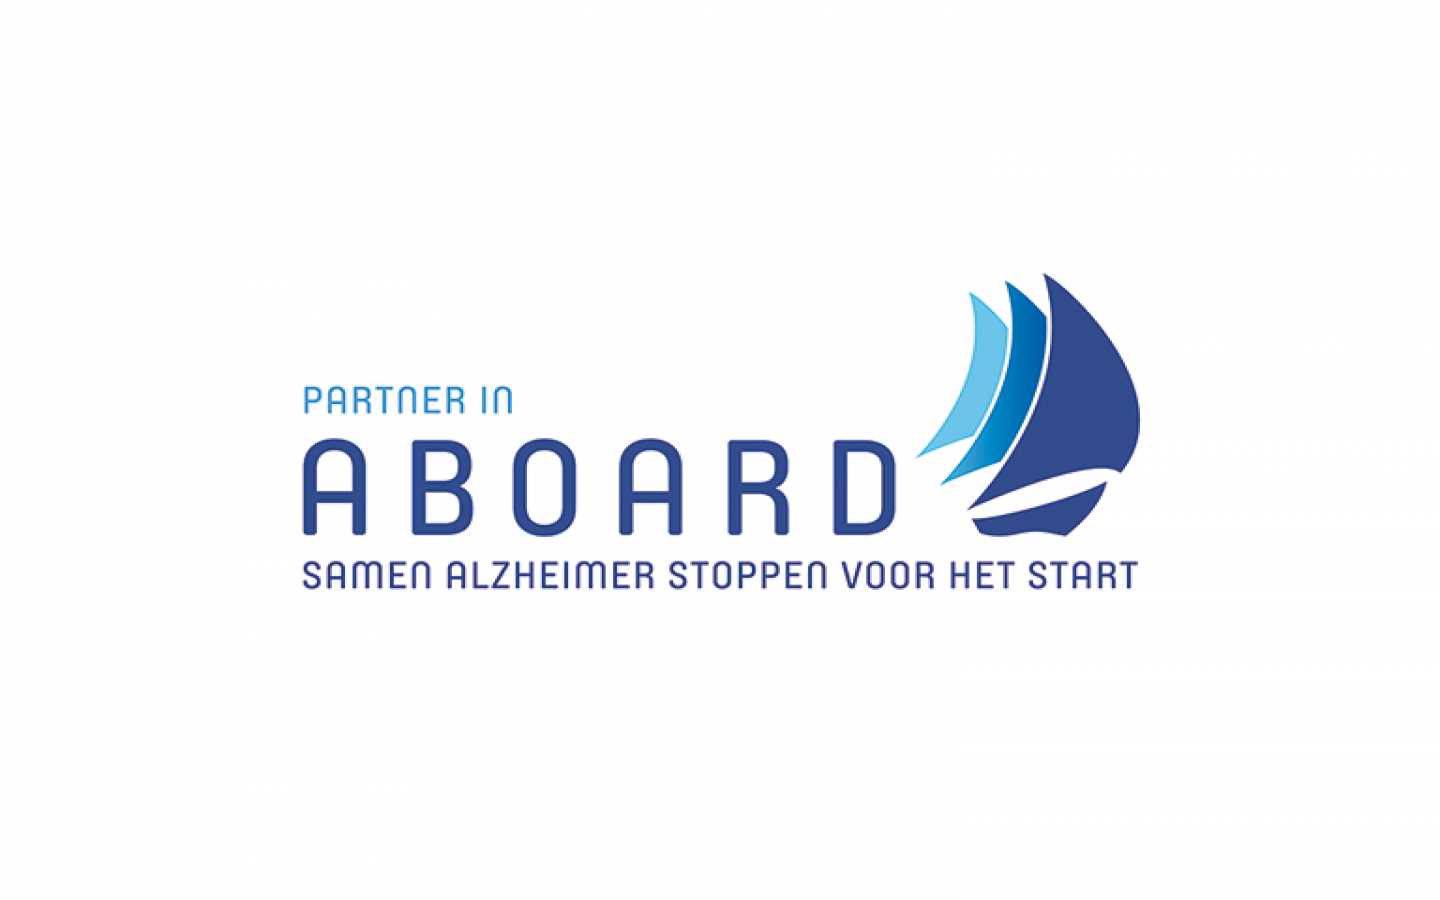 ABOARD-project.image